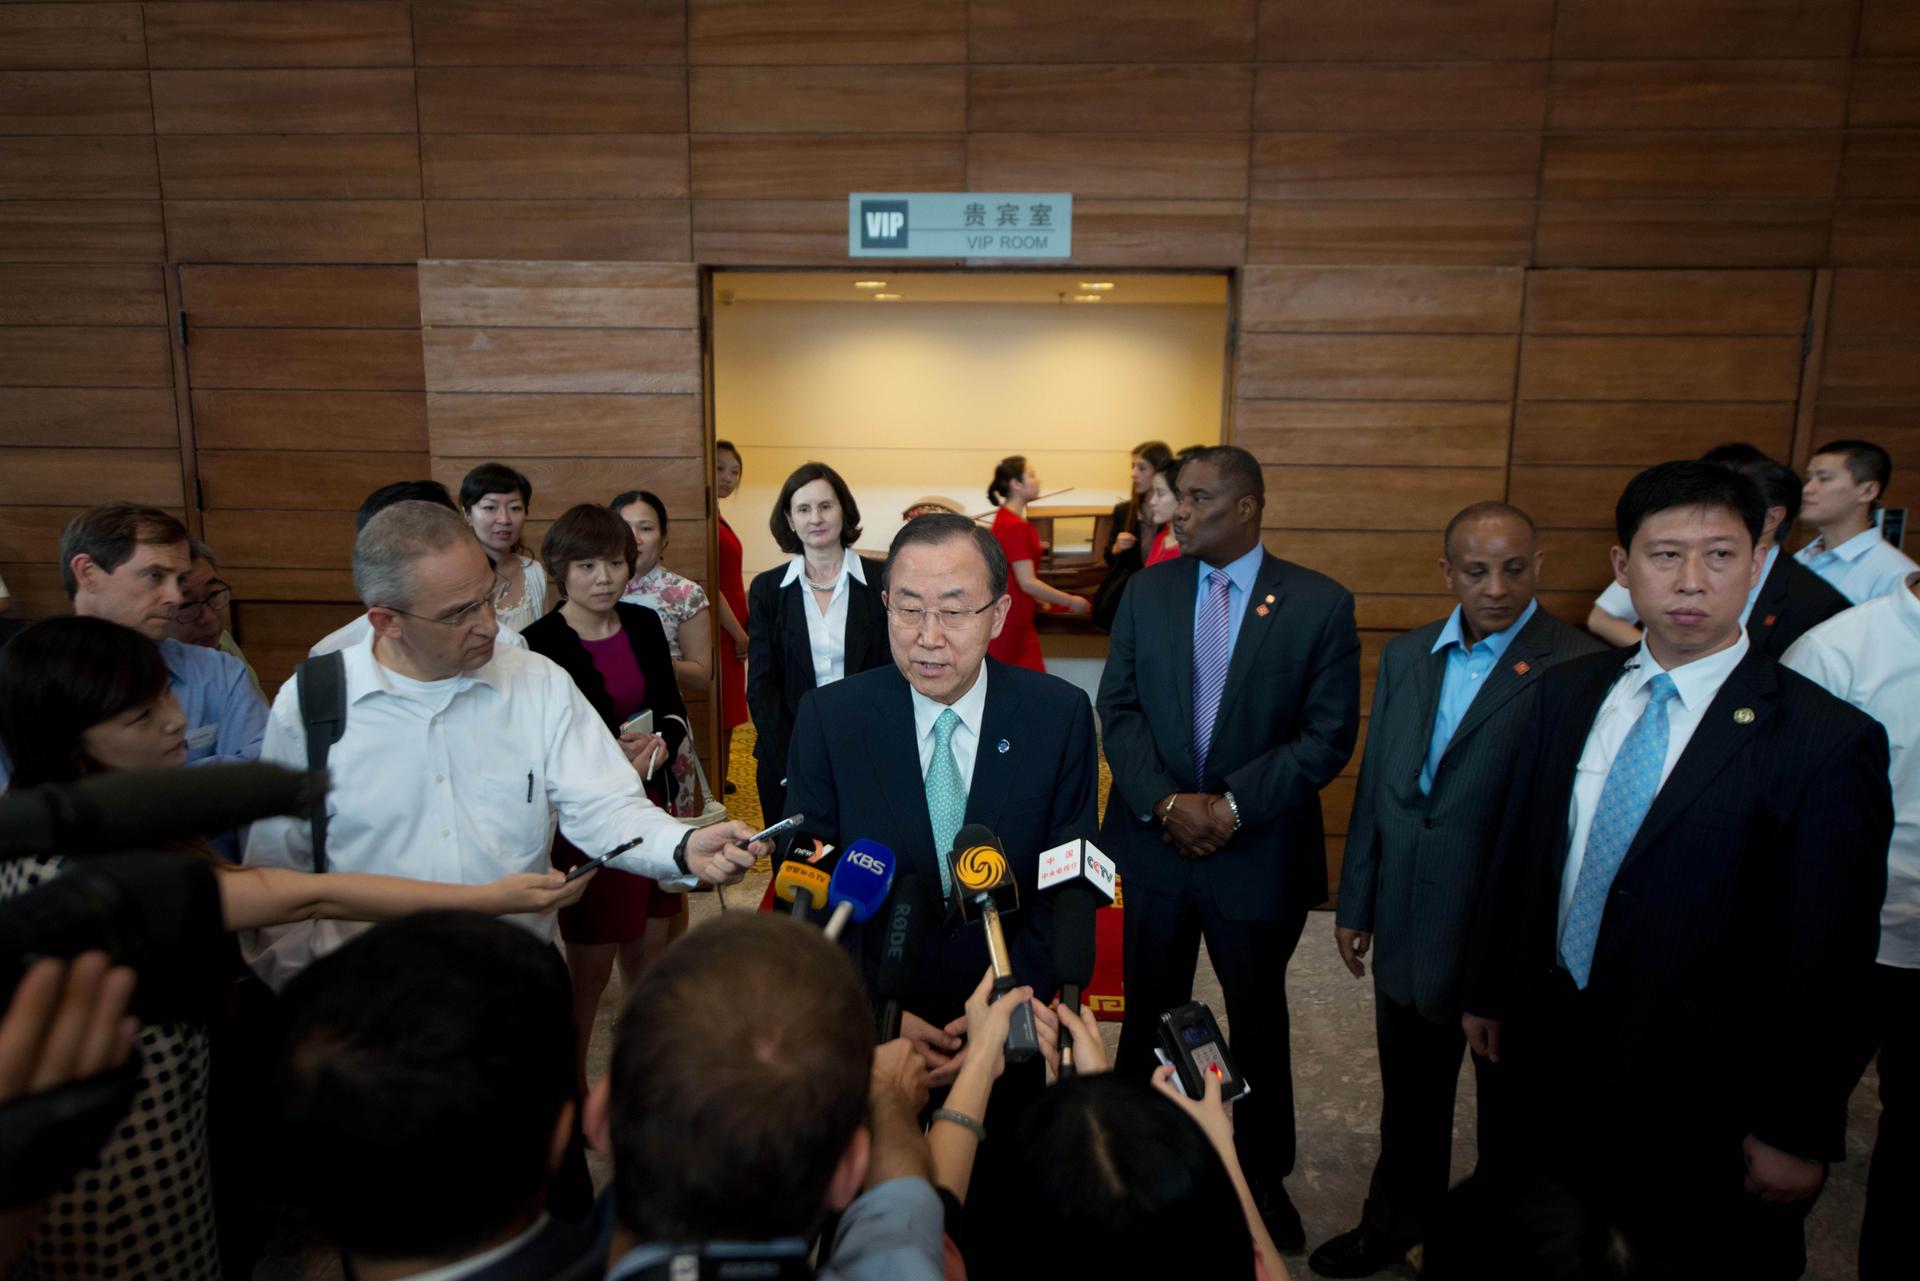 UN Secretary-General Ban Ki-moon talks to the media after visiting a 'low-carbon' exhibition in Beijing. Photo: AFP